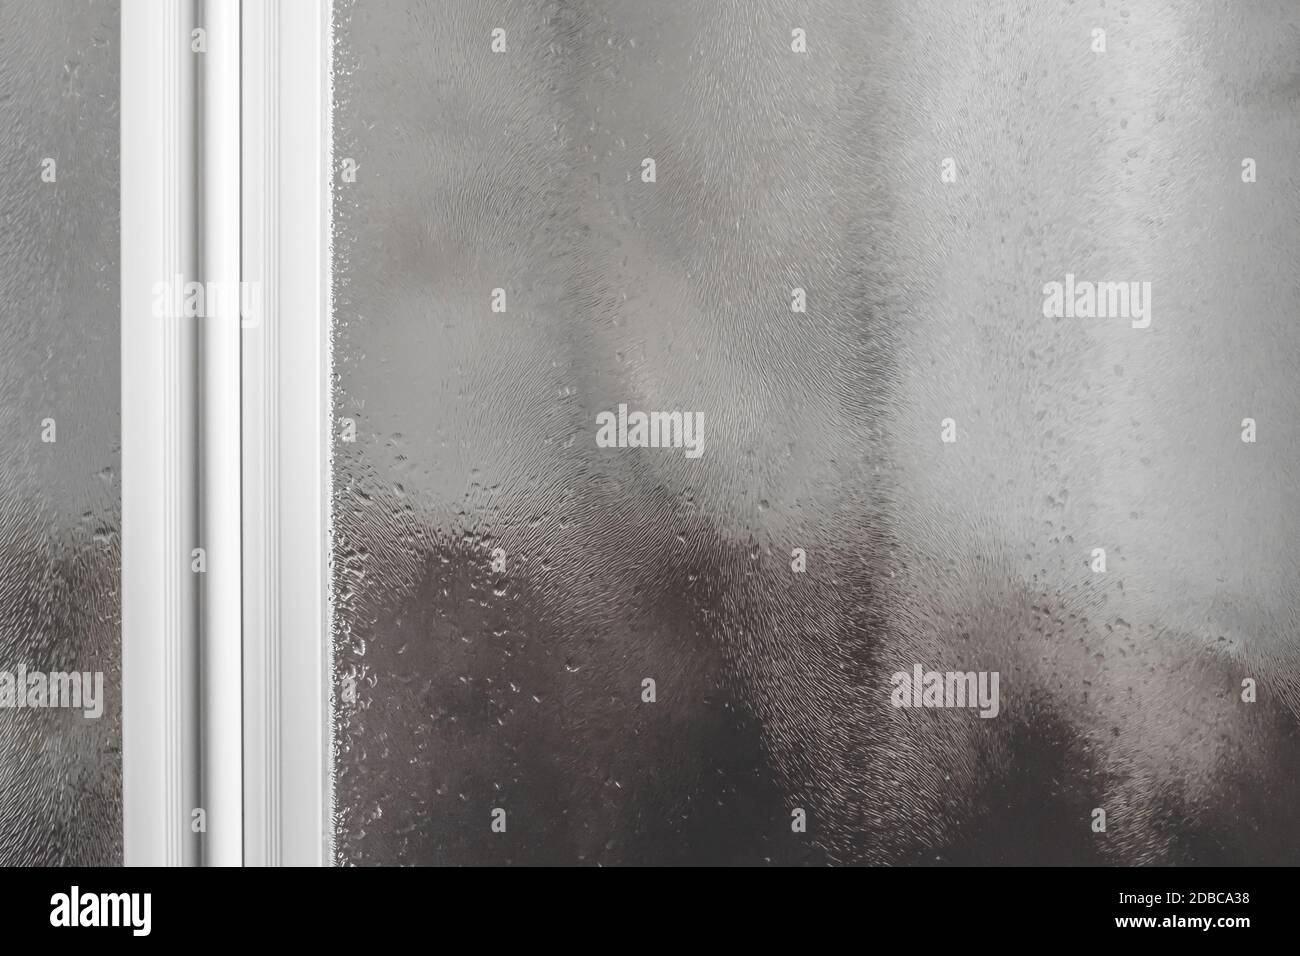 Wet shower stall. Drops of water on the glass. Drops of water flow down the misted glass. Stock Photo